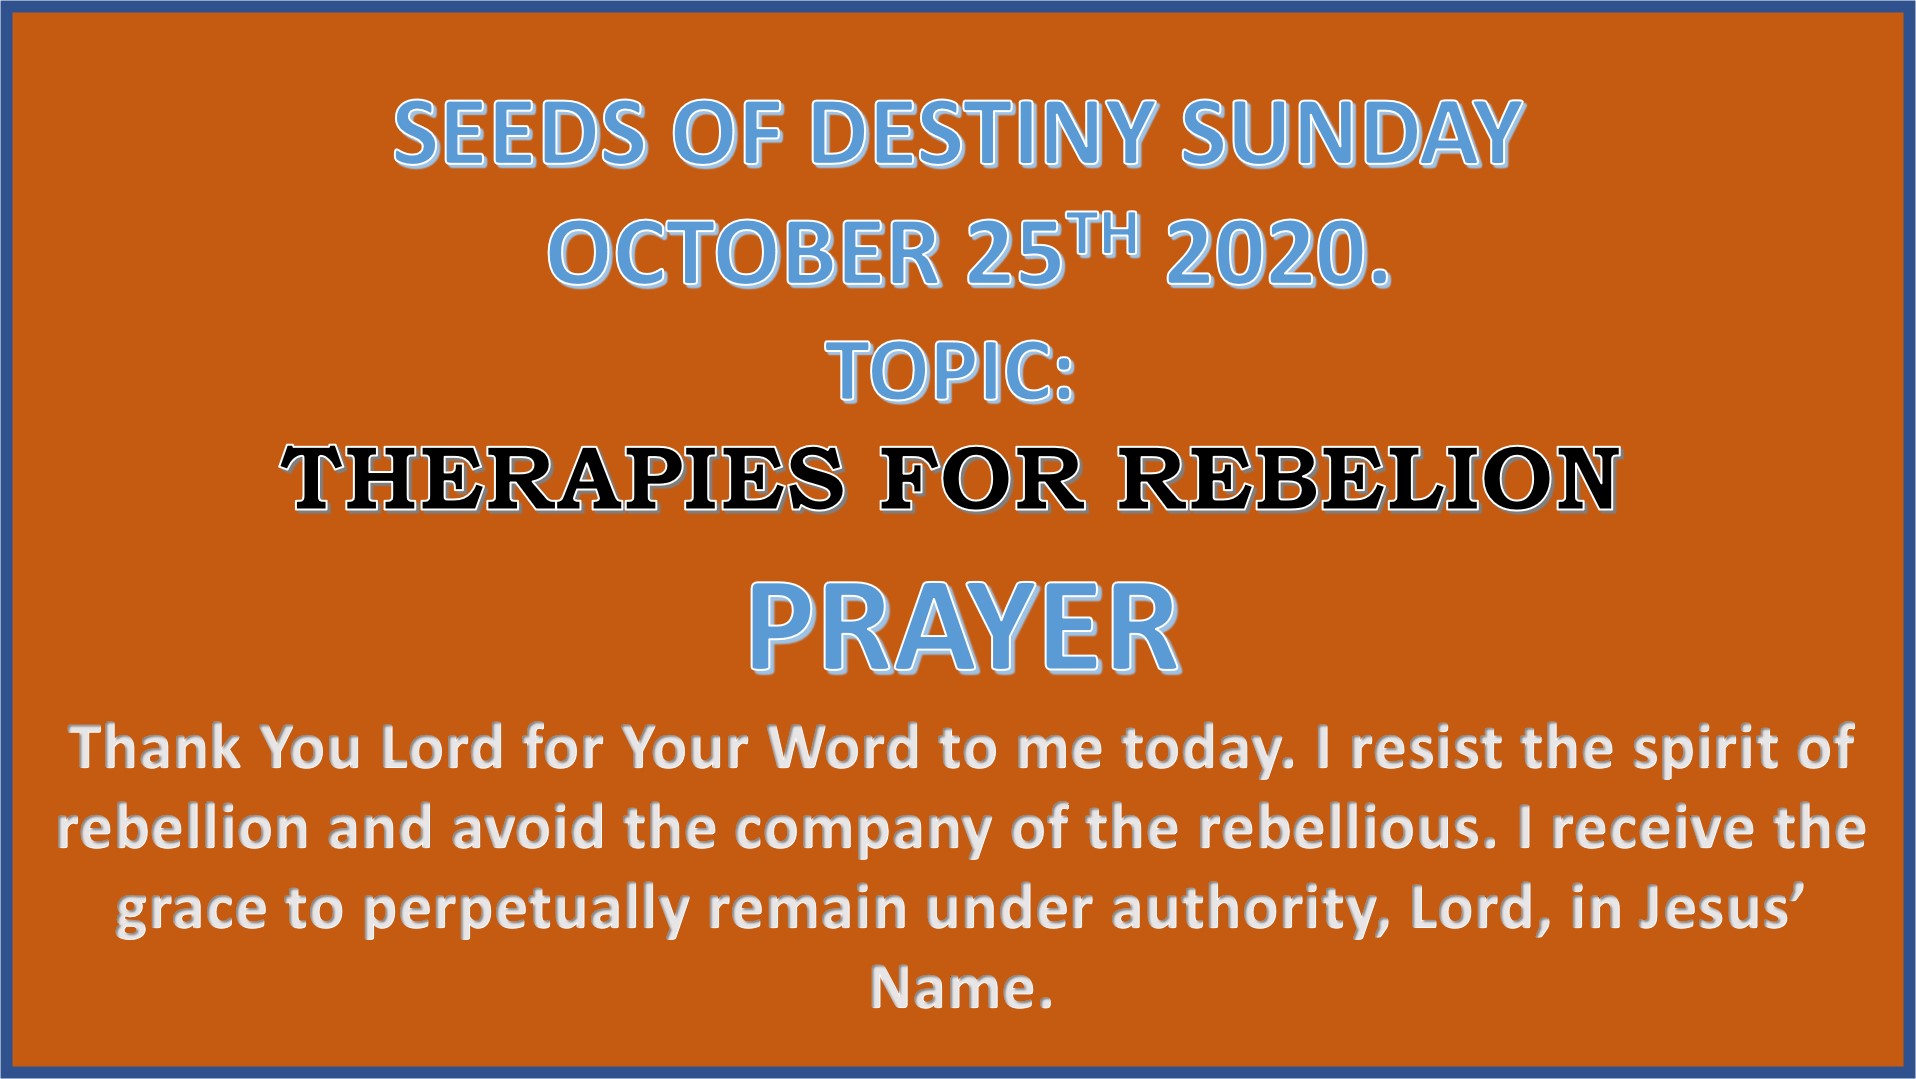 Seeds of Destiny Sunday 25th October 2020 by Dr Paul Enenche